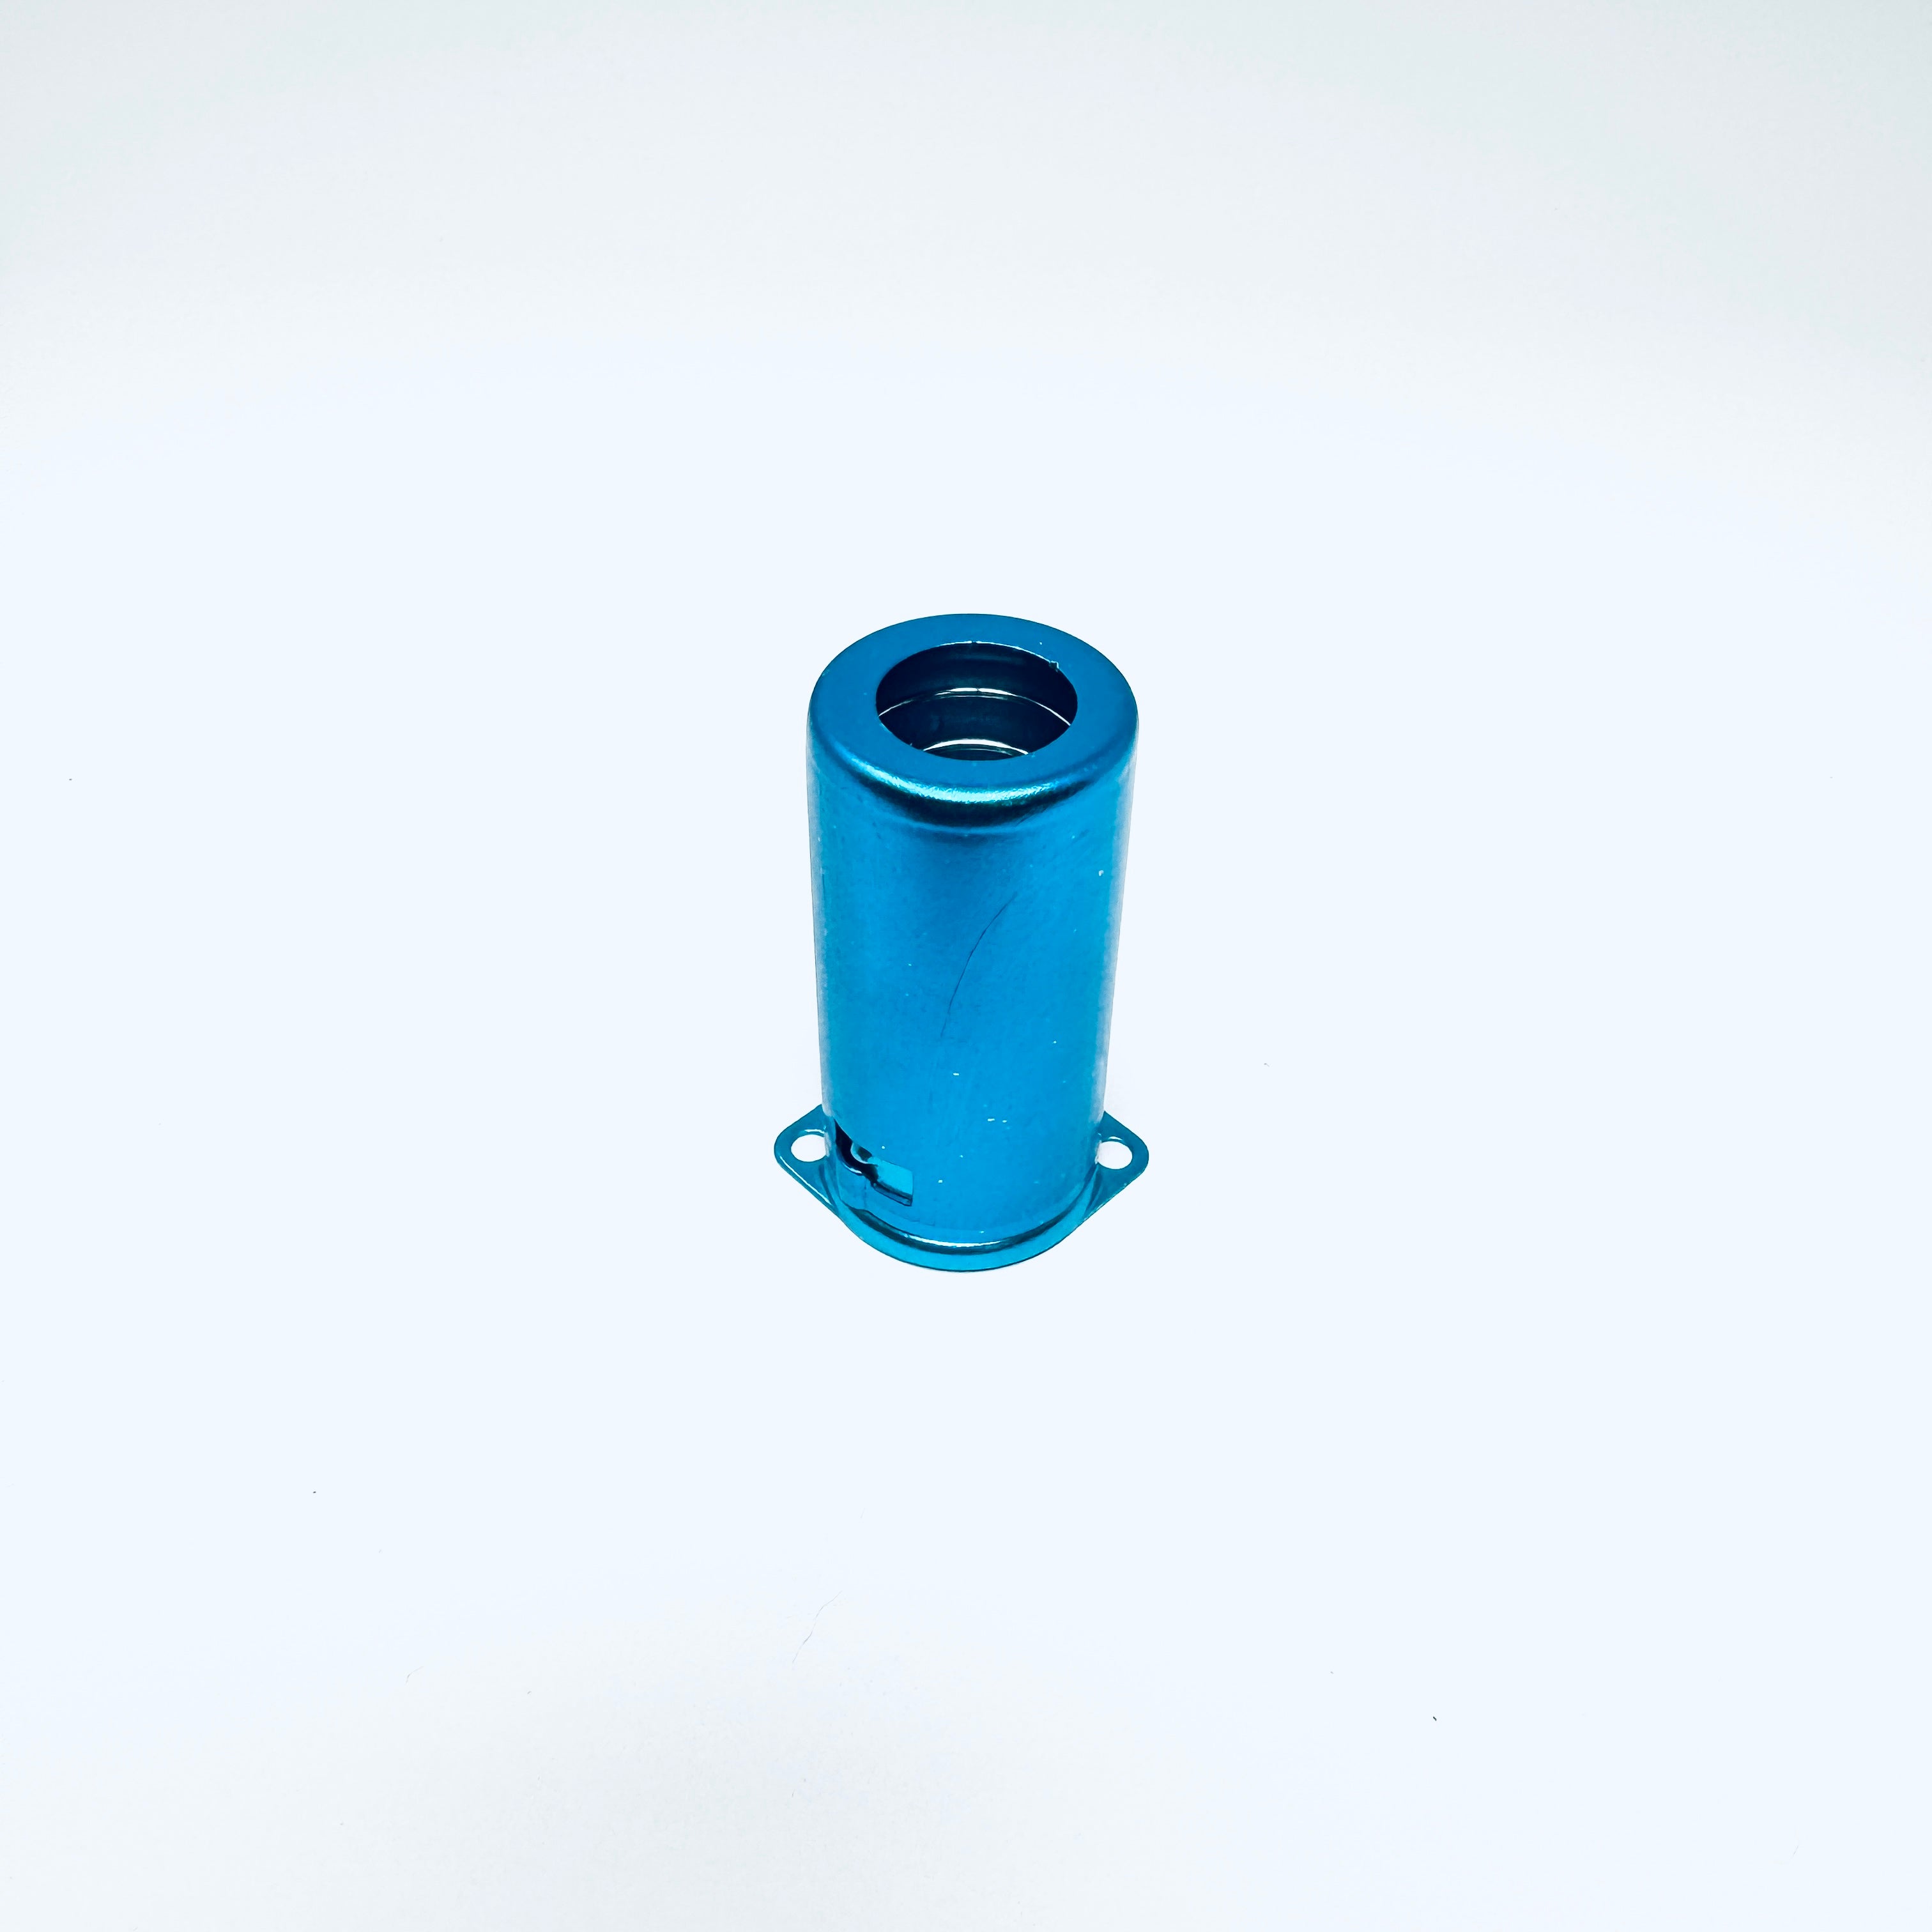 Blue Aluminum Tube Shield - 55mm Tall, tube shield for vacuum tubes, music amplifier parts